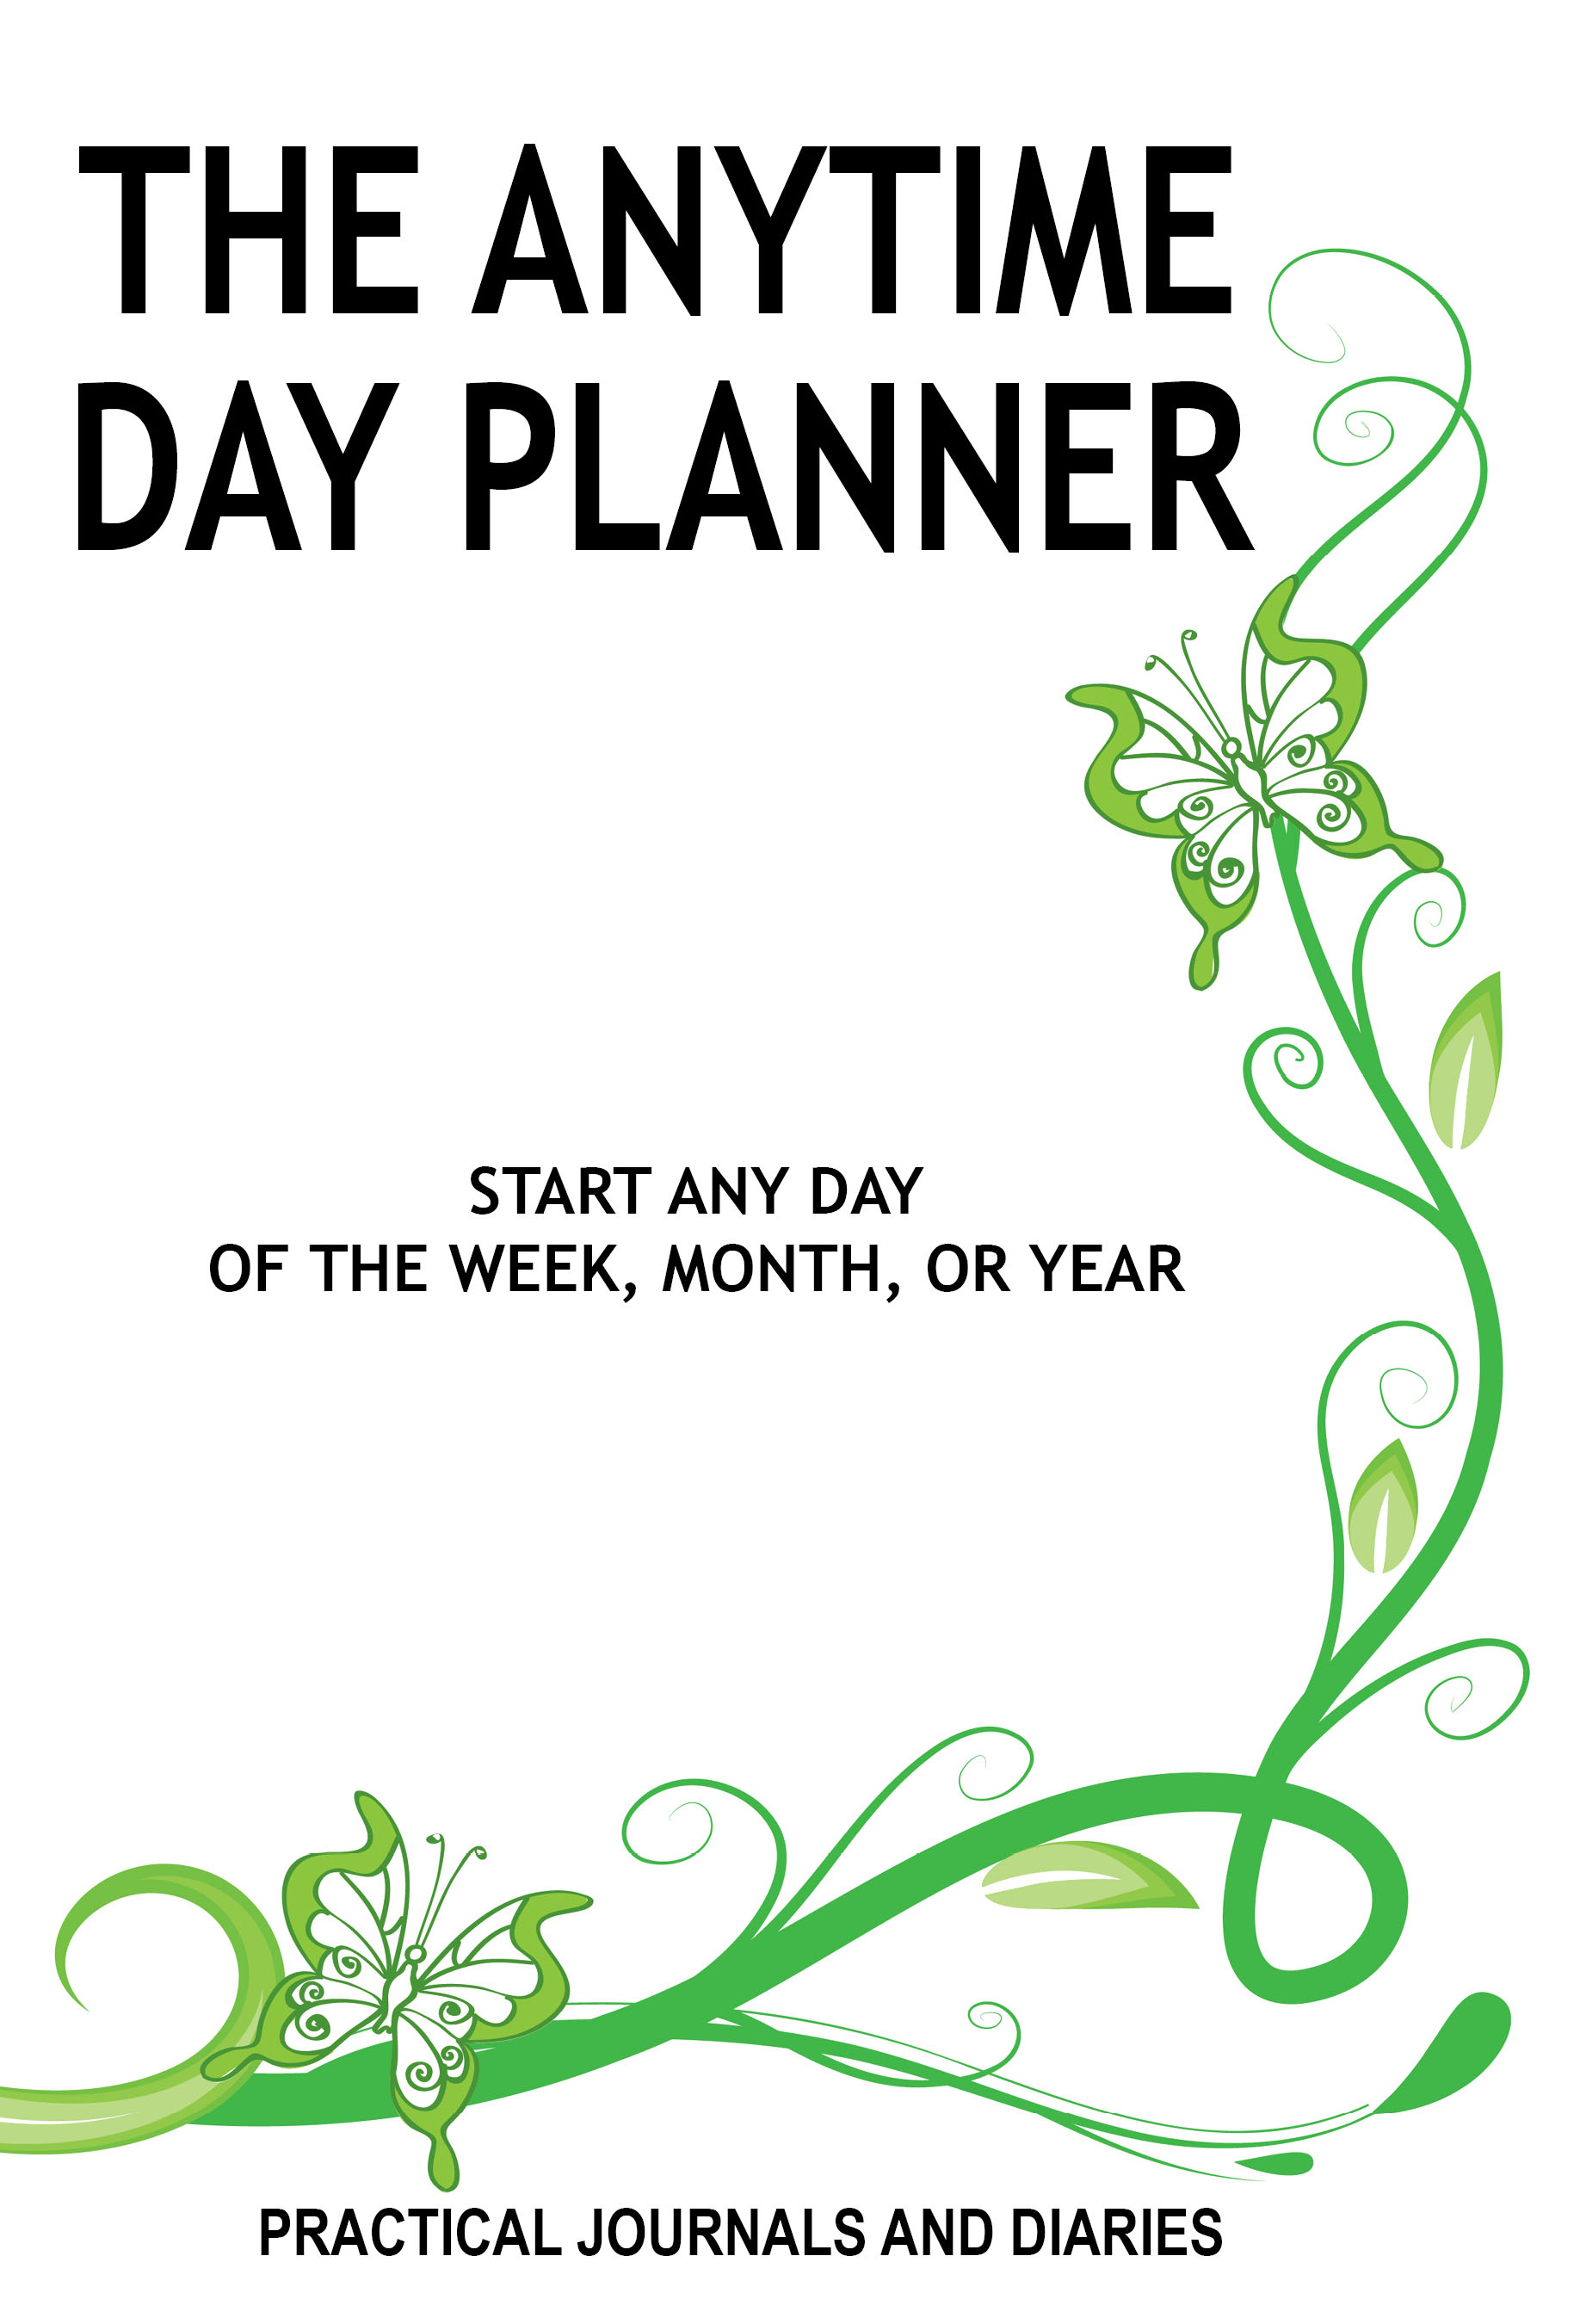 the anytime day planner cover